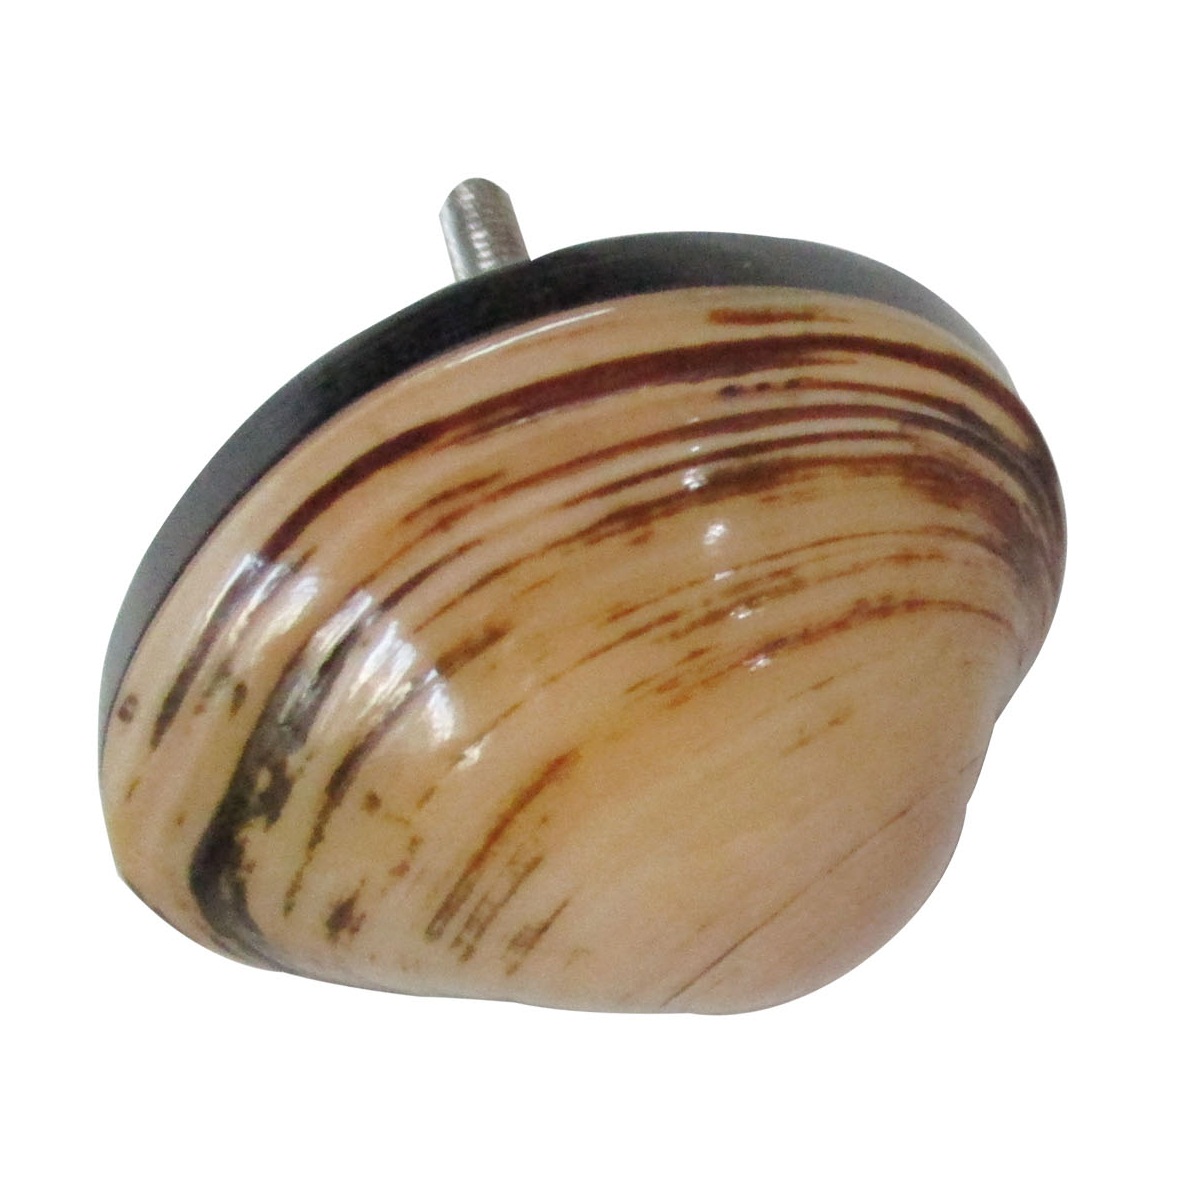 Shell 1-3/4 in. (45mm) Antique Peach Cabinet Knob